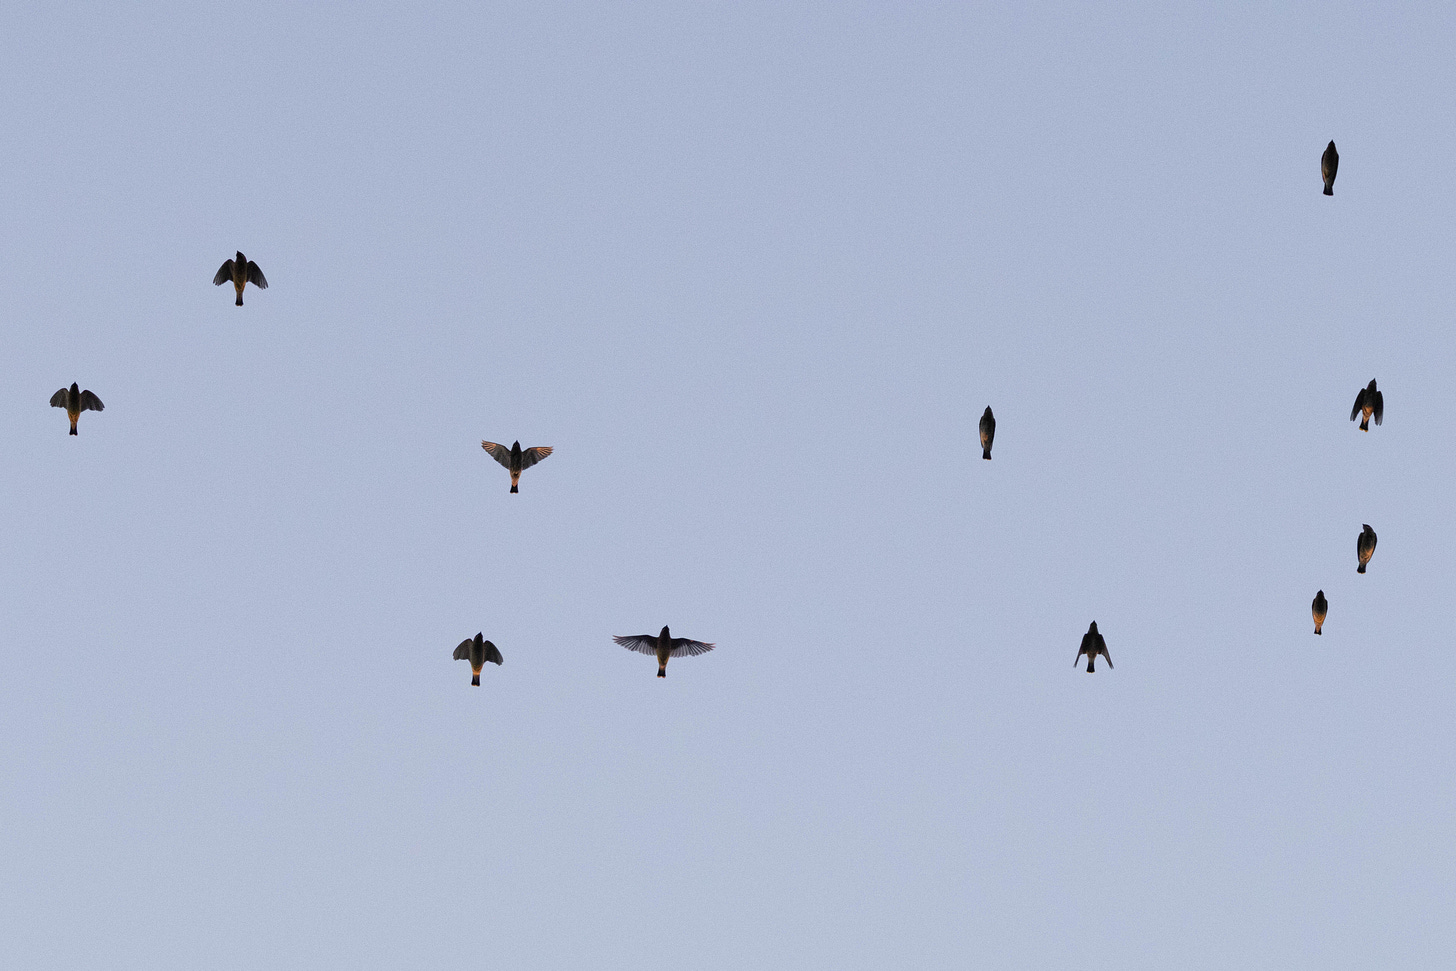 the silhouettes of a eleven short-winged songbirds flying against the pale sky